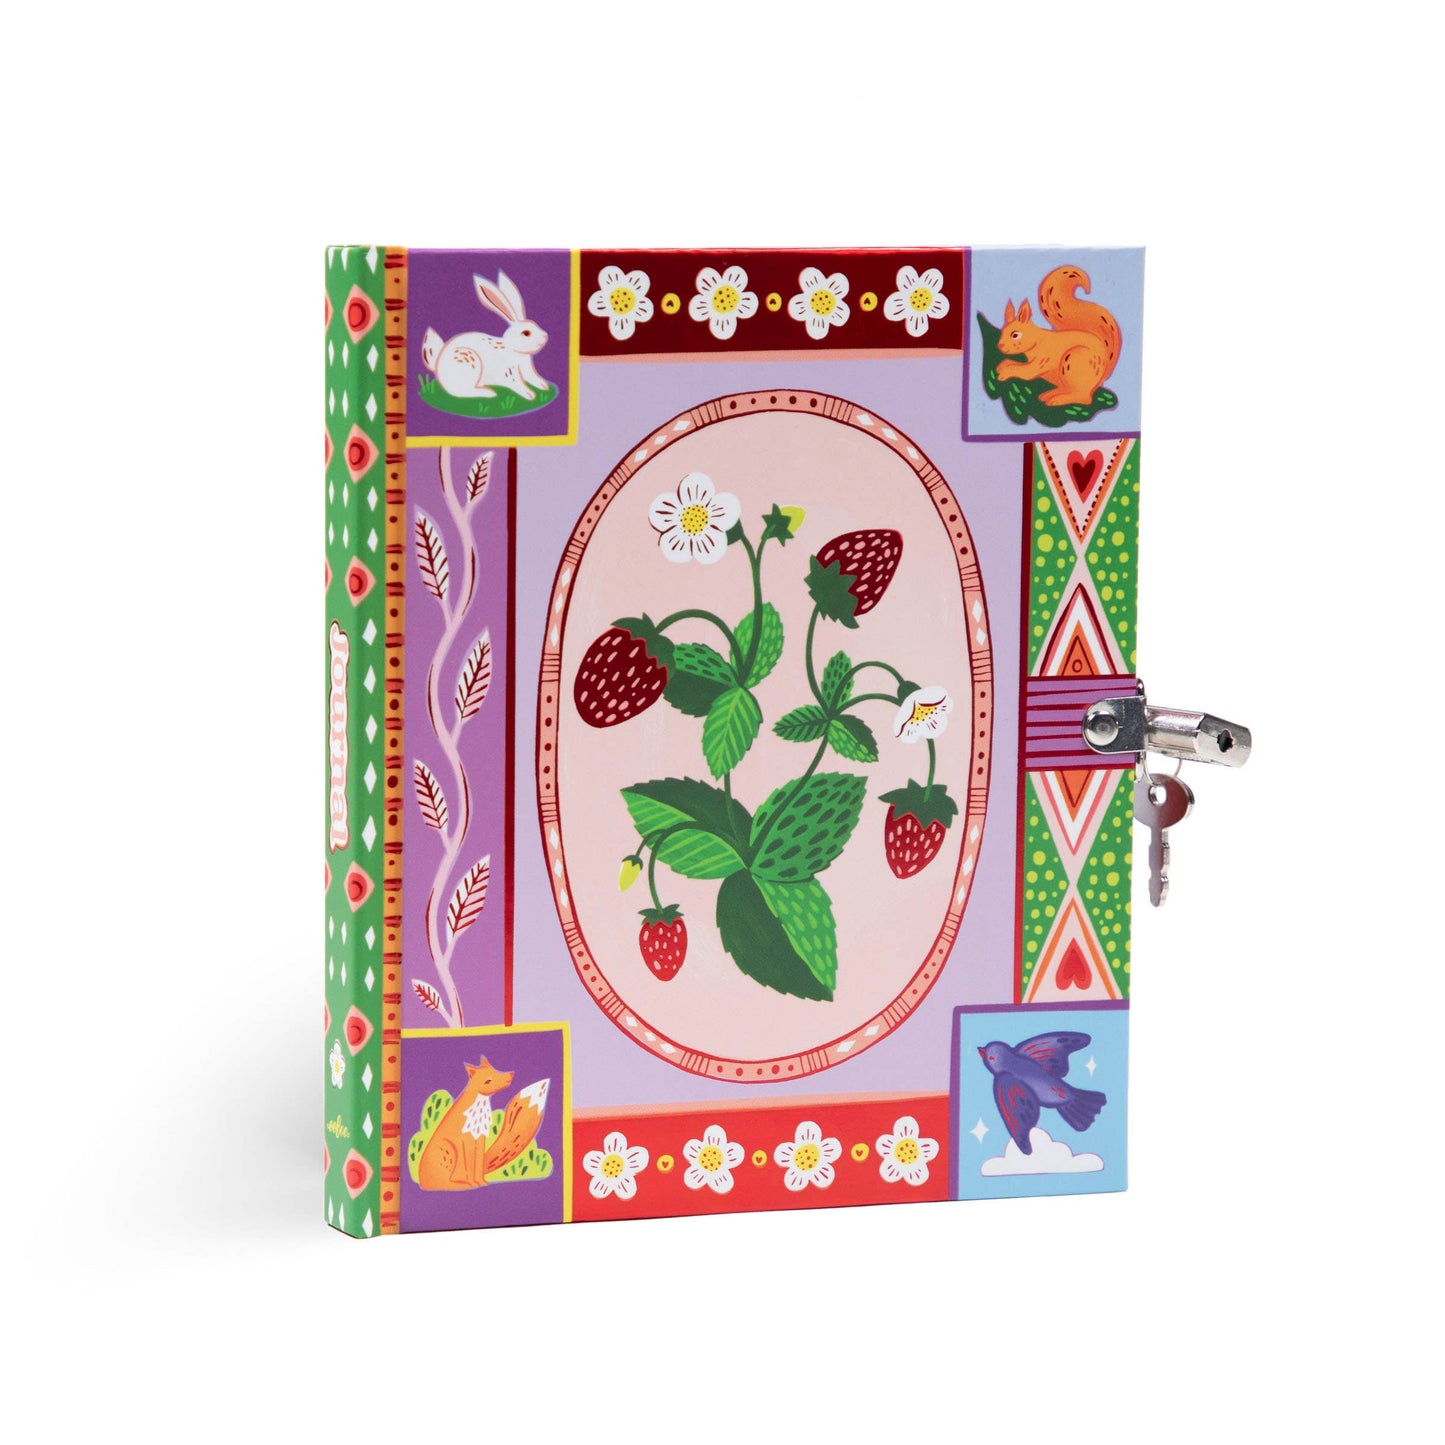 Strawberries Hardcover Journal with lock and key